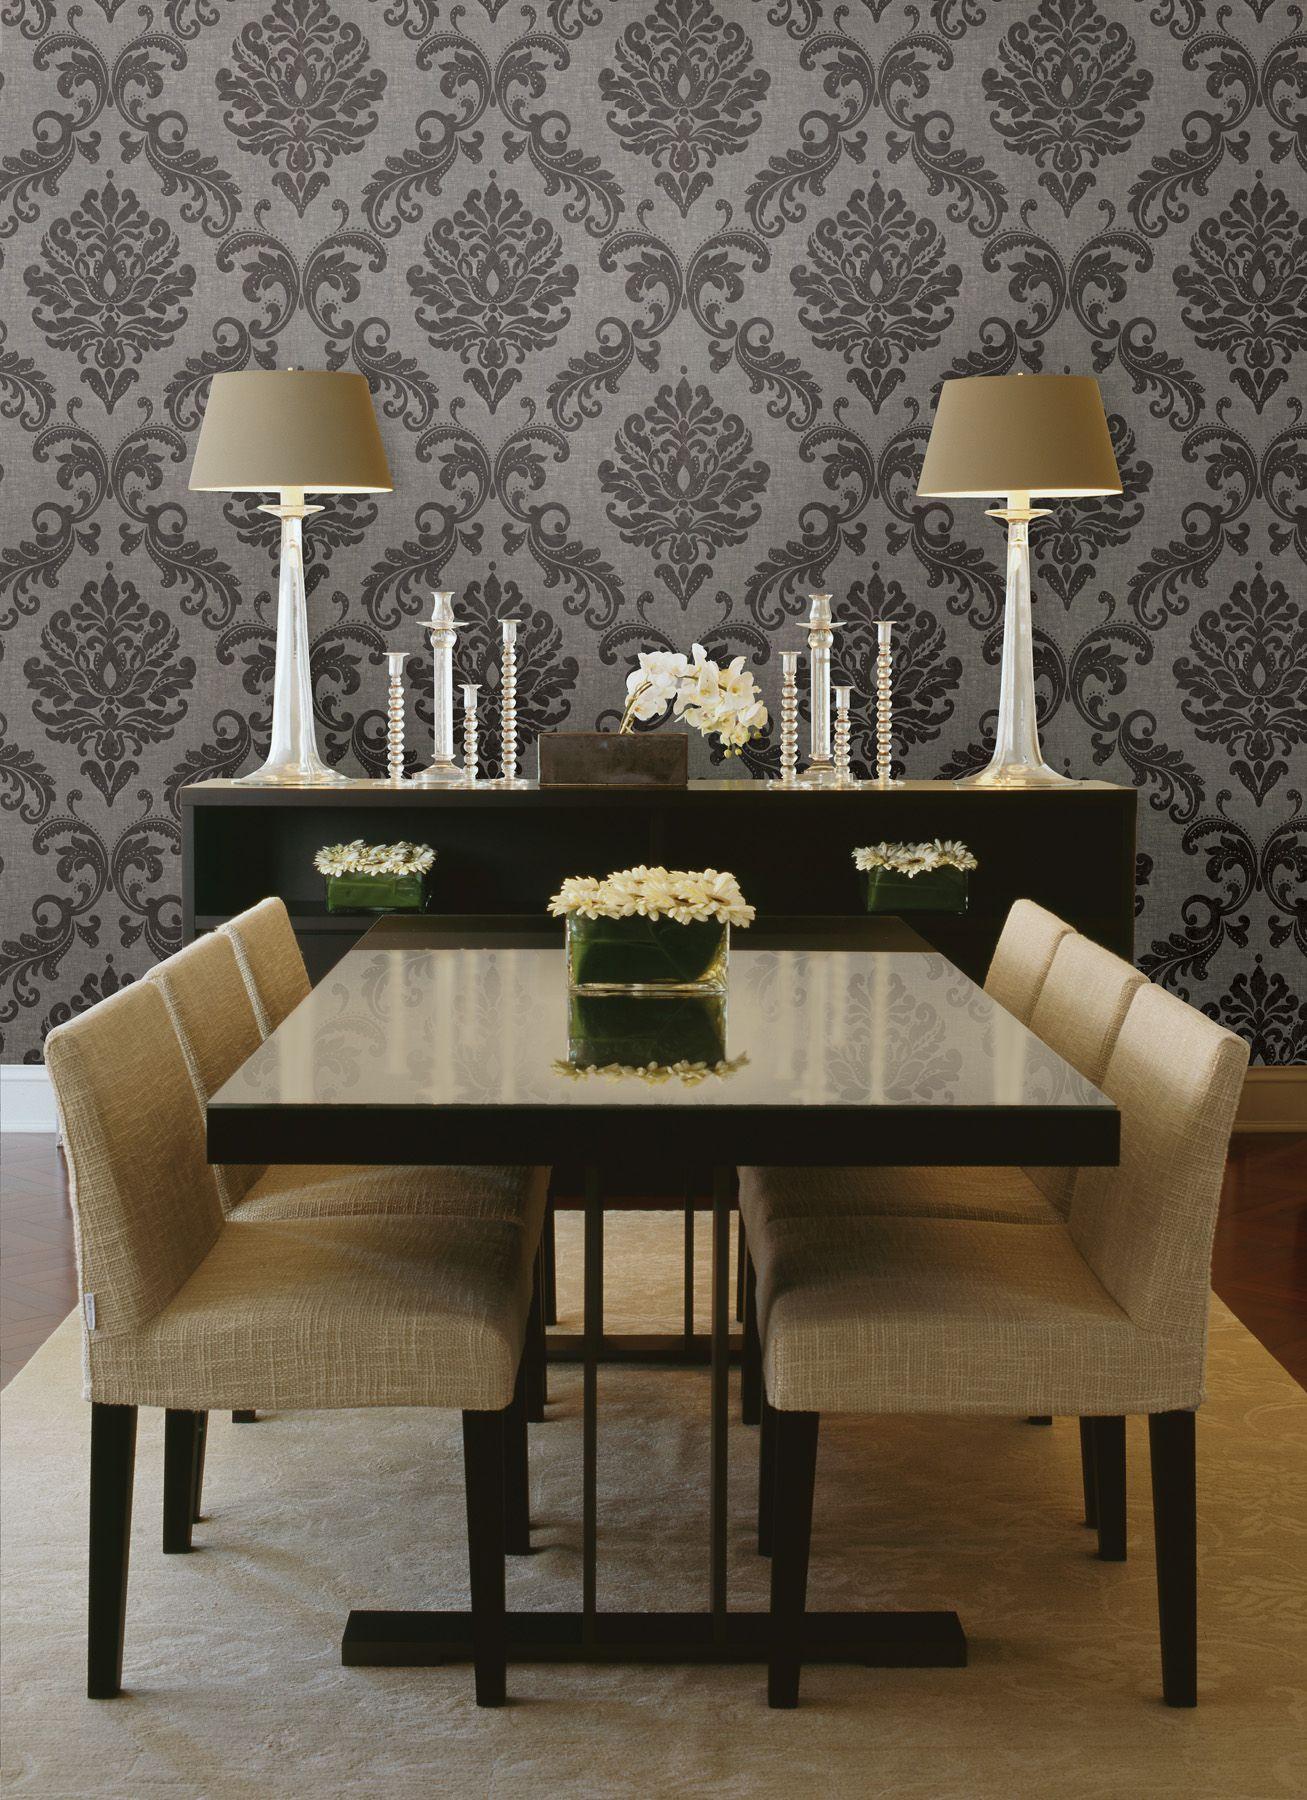 1307 x 1800 · jpeg - Gorgeous formal dining room decor idea with a damask wallpaper feature ...